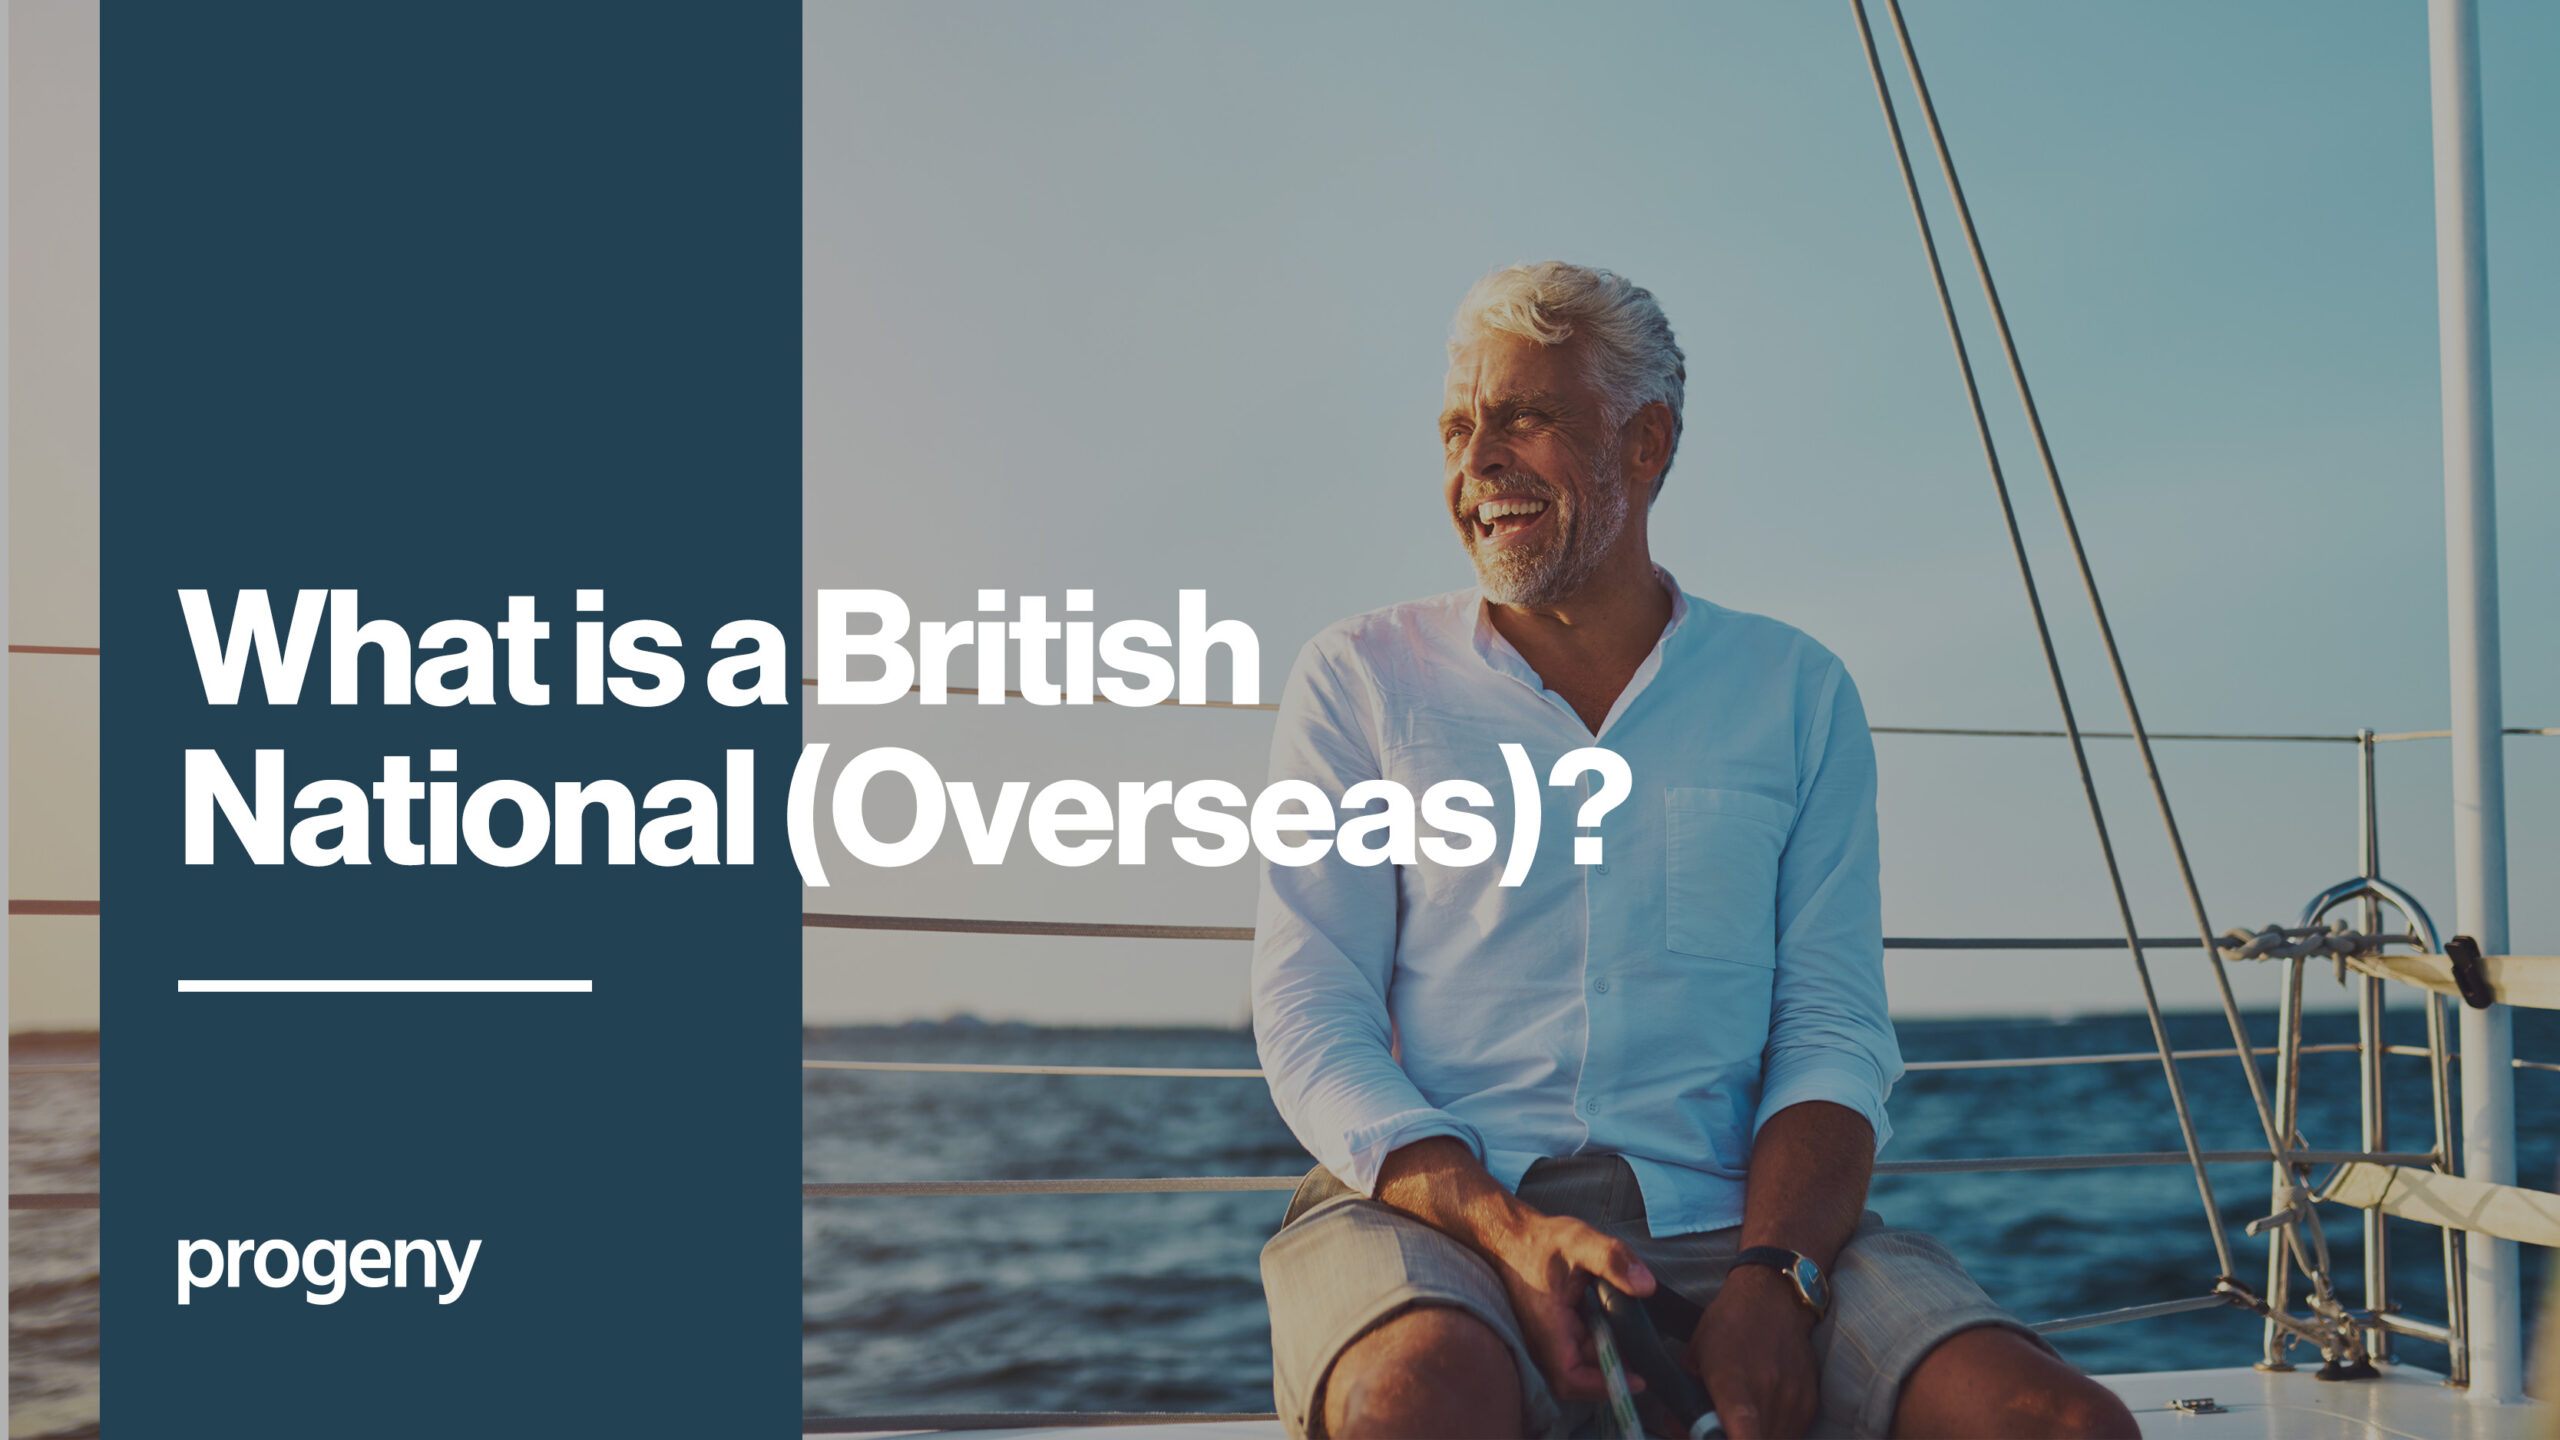 What is a British National Overseas